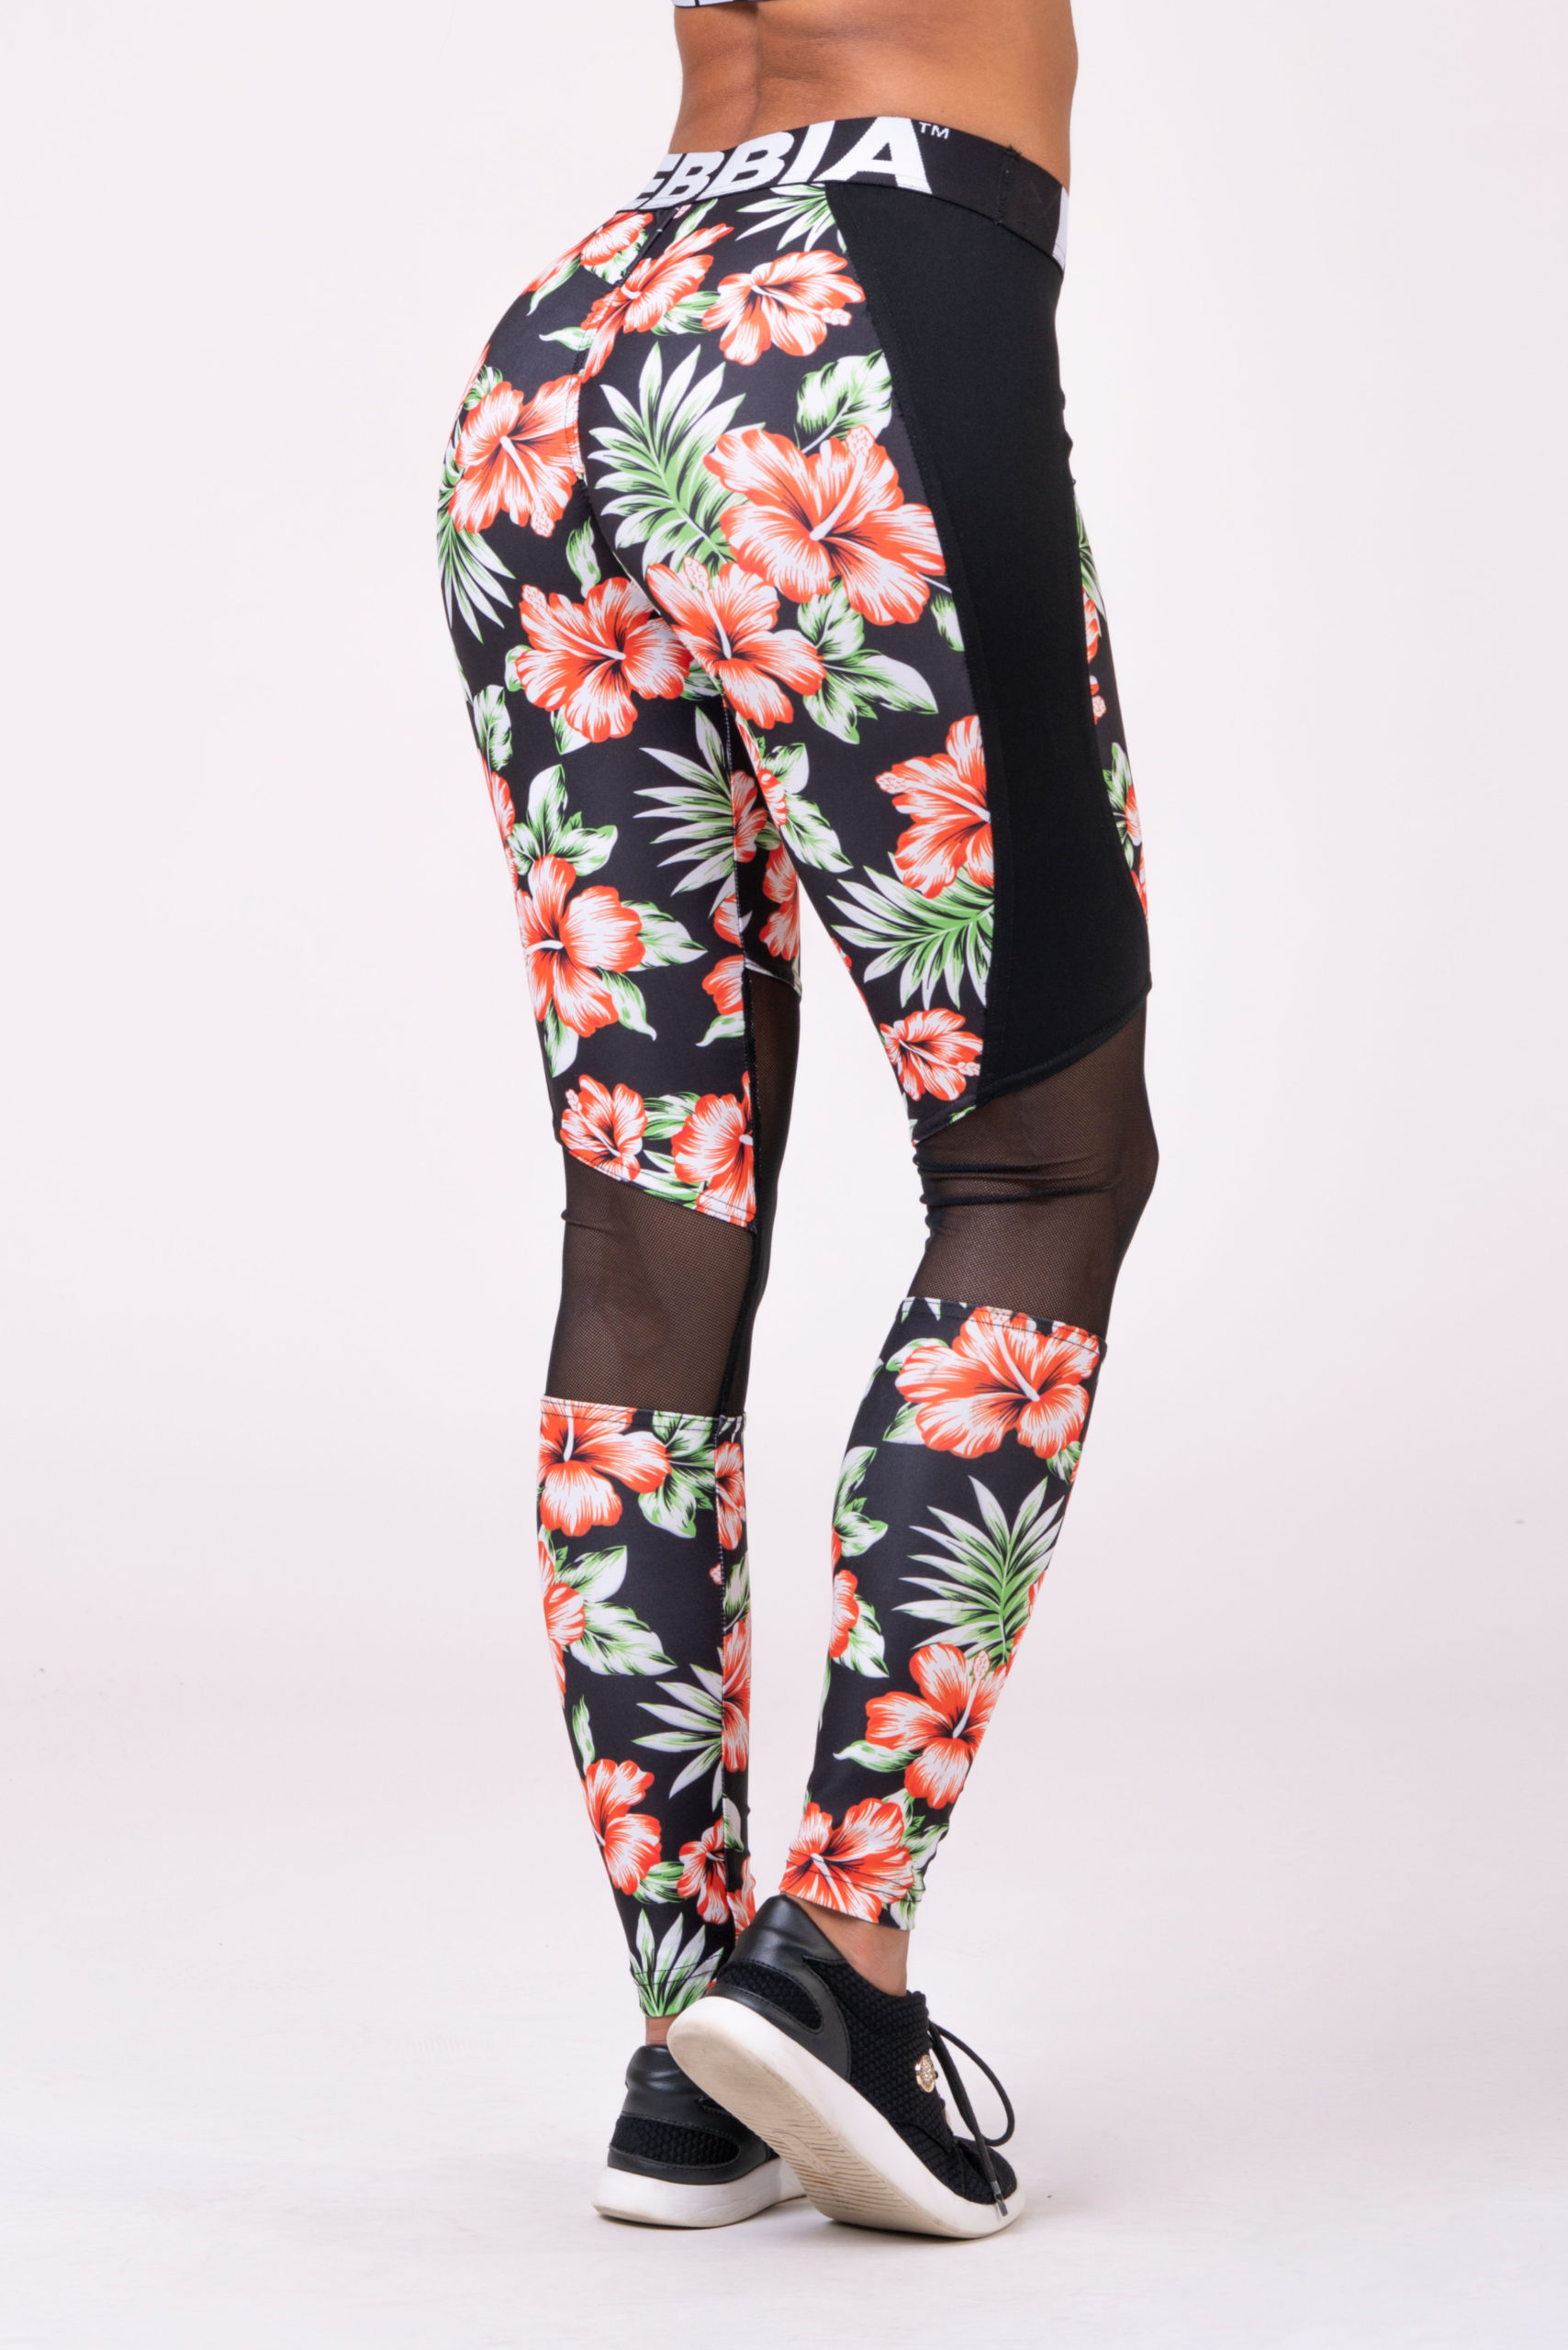 Hawaii Hangover Women's Tropical Print Performance Yoga Excercise Full  Ankle Length Legging in Side Flamingo FLoral in Black XS/S 